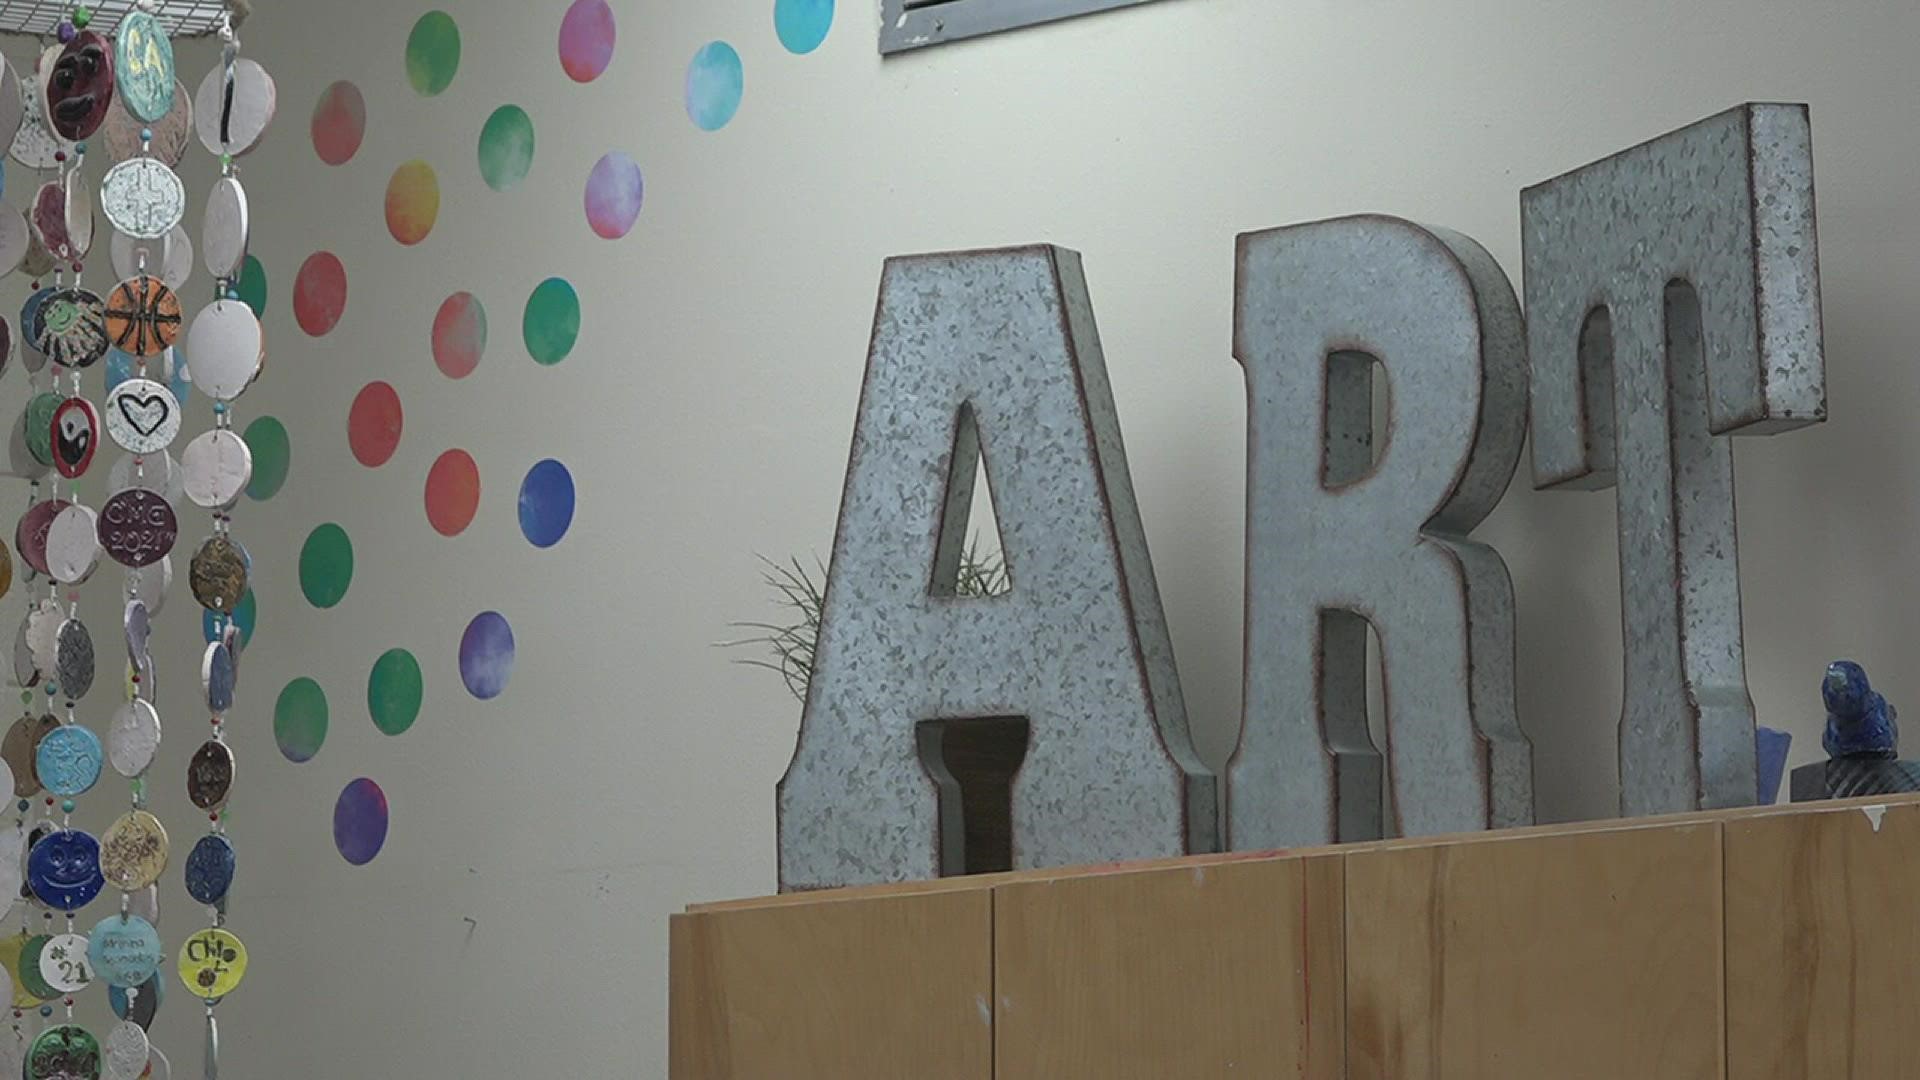 City leaders have teamed up with artists from Nederland High School in a new project called the ‘art banner project.’